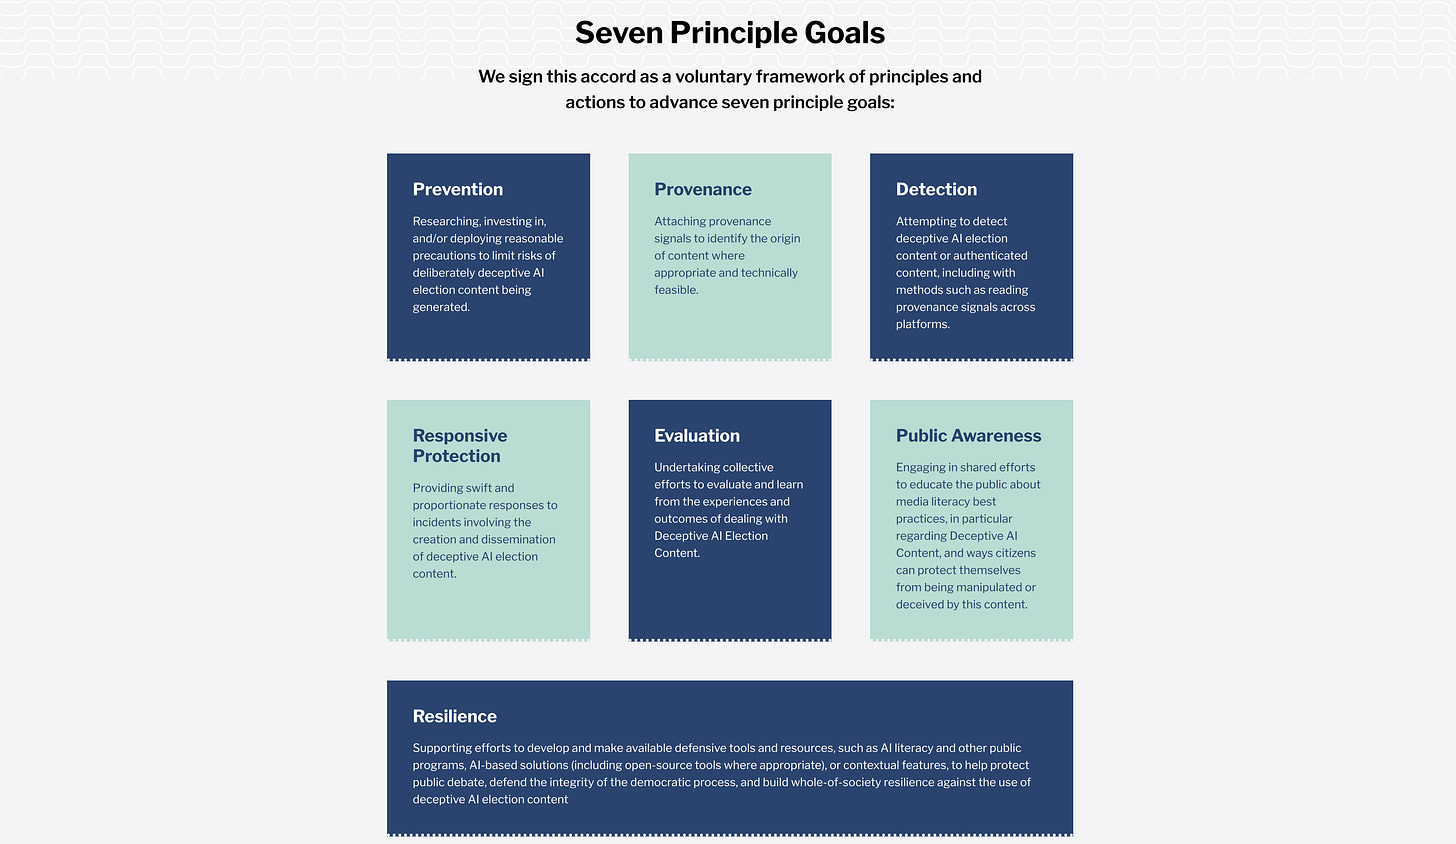 Seven Principle Goals We sign this accord as a voluntary framework of principles and actions to advance seven principle goals:  Prevention Researching, investing in, and/or deploying reasonable precautions to limit risks of deliberately deceptive AI election content being generated.  Provenance Attaching provenance signals to identify the origin of content where appropriate and technically feasible.   Detection Attempting to detect deceptive AI election content or authenticated content, including with methods such as reading provenance signals across platforms.   Responsive Protection Providing swift and proportionate responses to incidents involving the creation and dissemination of deceptive AI election content.   Evaluation Undertaking collective efforts to evaluate and learn from the experiences and outcomes of dealing with Deceptive AI Election Content.  Public Awareness Engaging in shared efforts to educate the public about media literacy best practices, in particular regarding Deceptive AI Content, and ways citizens can protect themselves from being manipulated or deceived by this content.  Resilience Supporting efforts to develop and make available defensive tools and resources, such as AI literacy and other public programs, AI-based solutions (including open-source tools where appropriate), or contextual features, to help protect public debate, defend the integrity of the democratic process, and build whole-of-society resilience against the use of deceptive AI election content